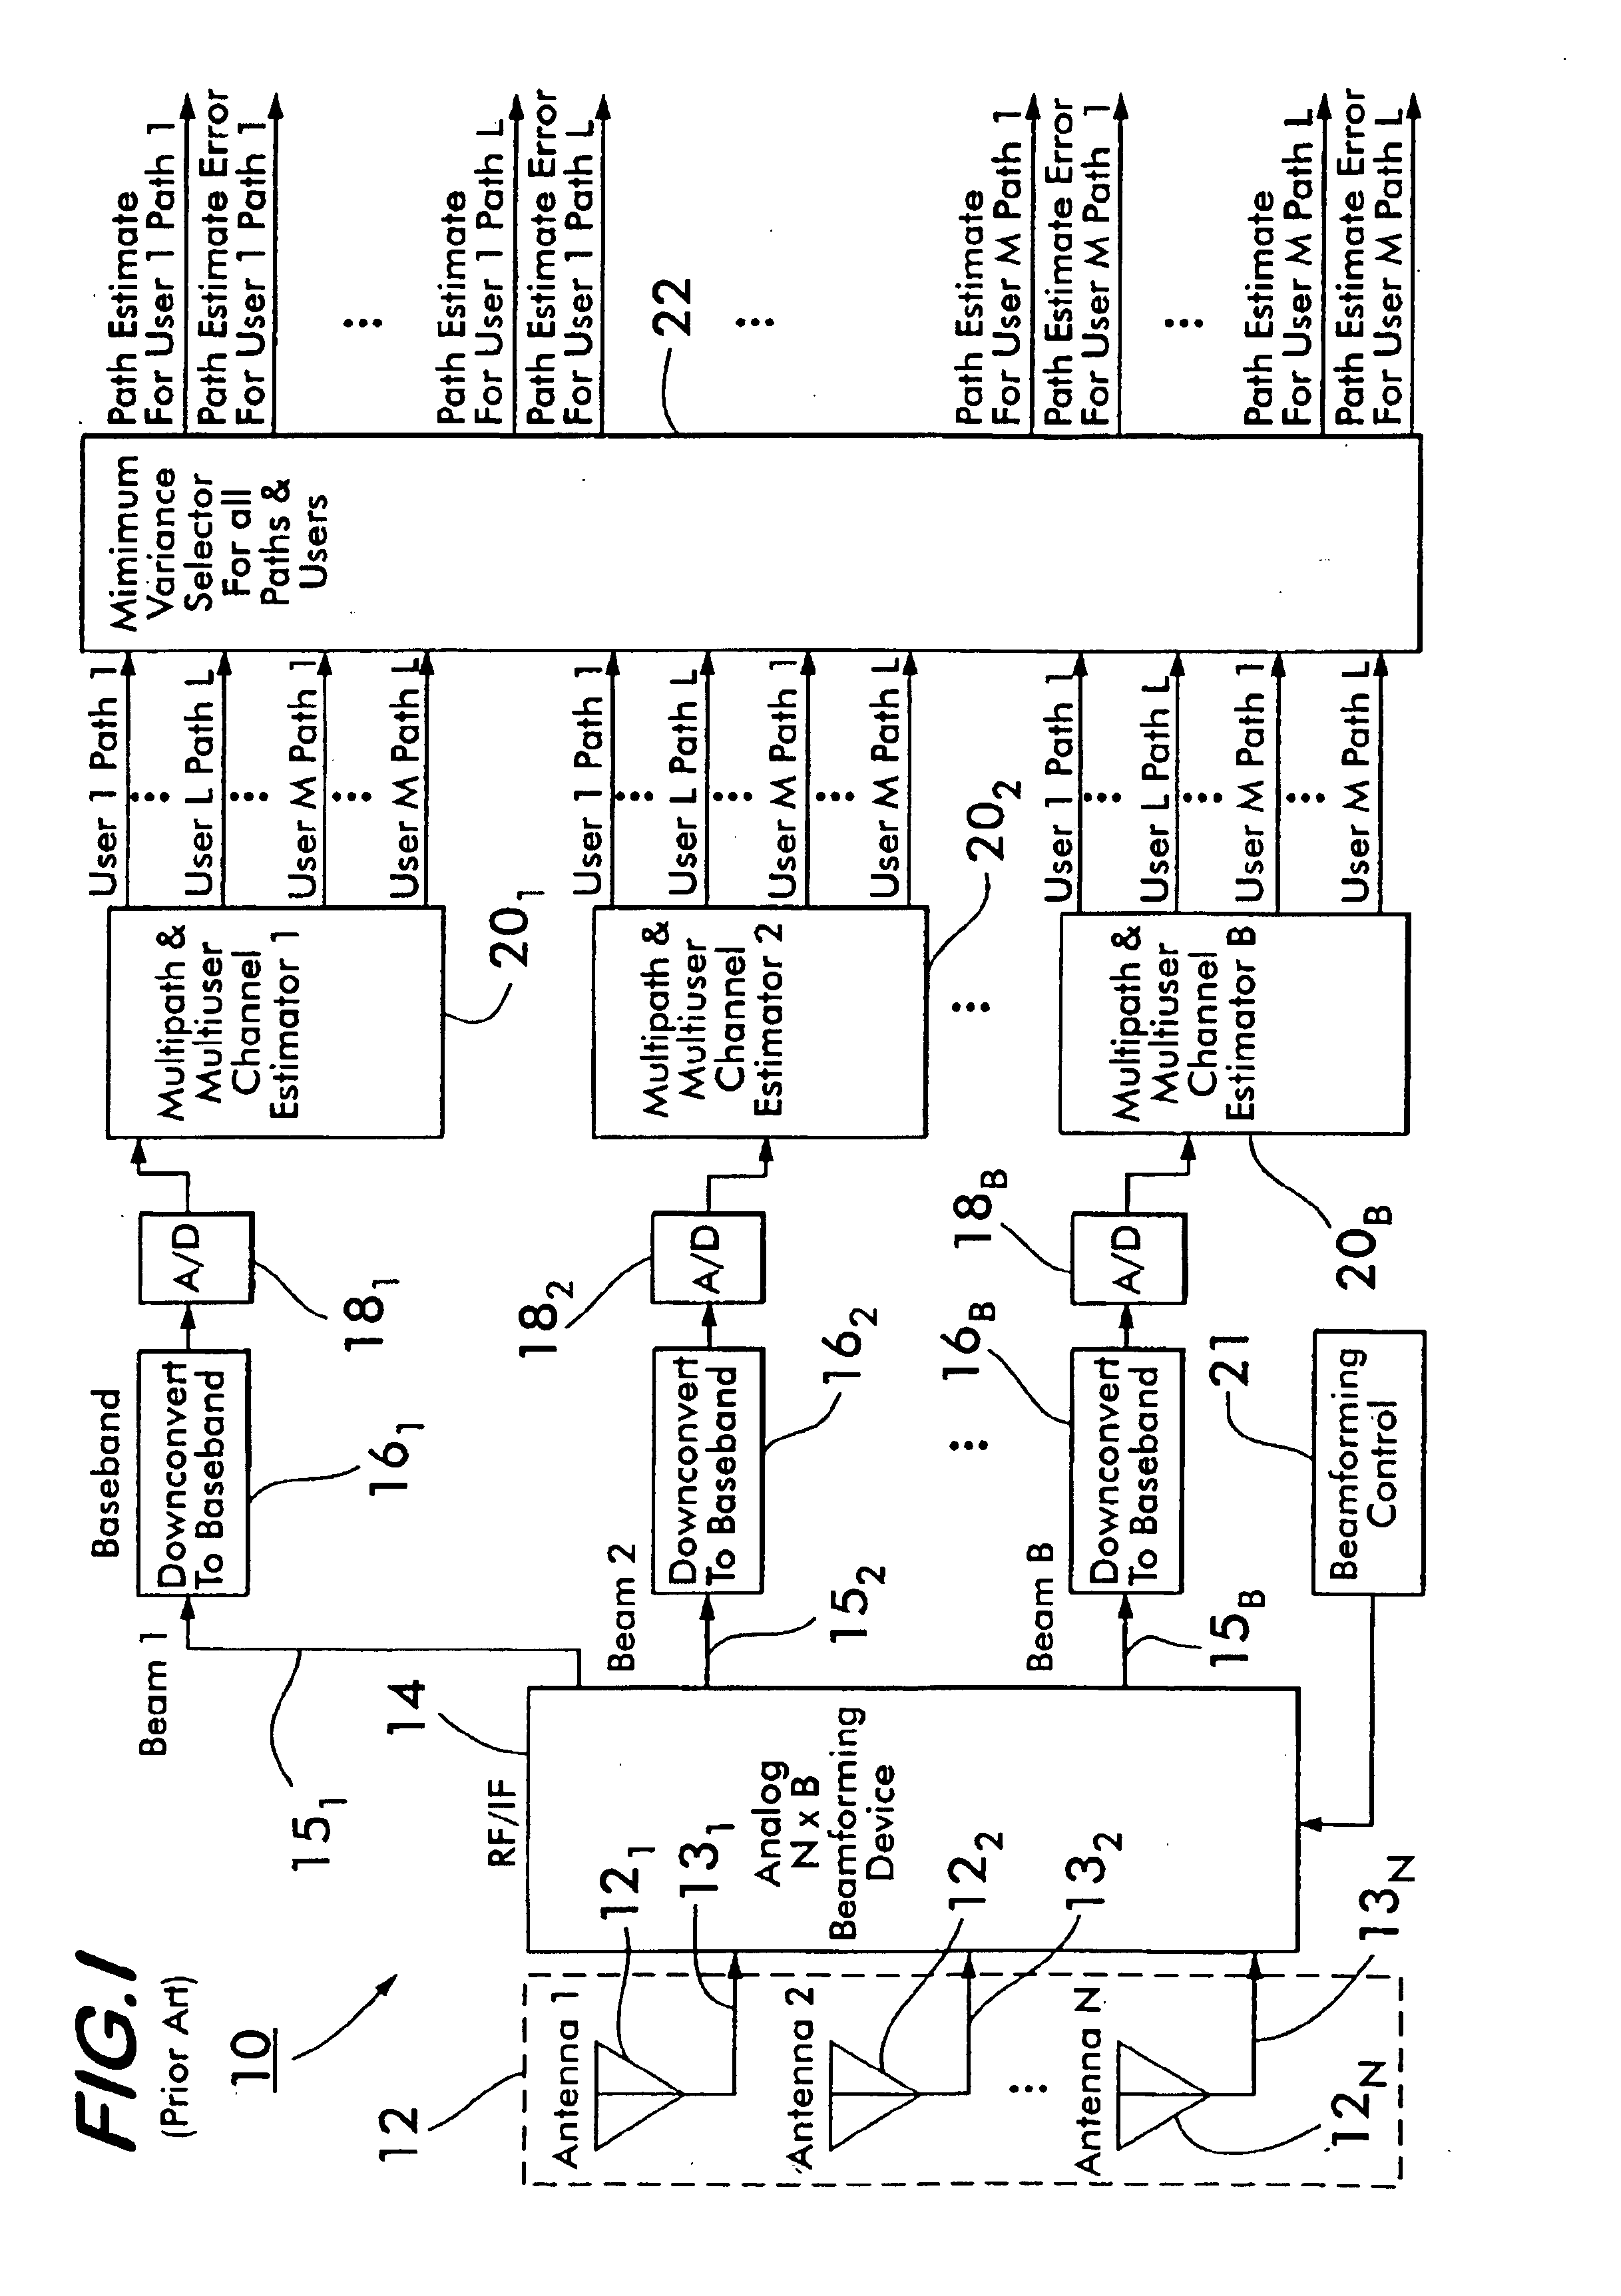 Method and apparatus for scheduling switched multibeam antennas in a multiple access environment